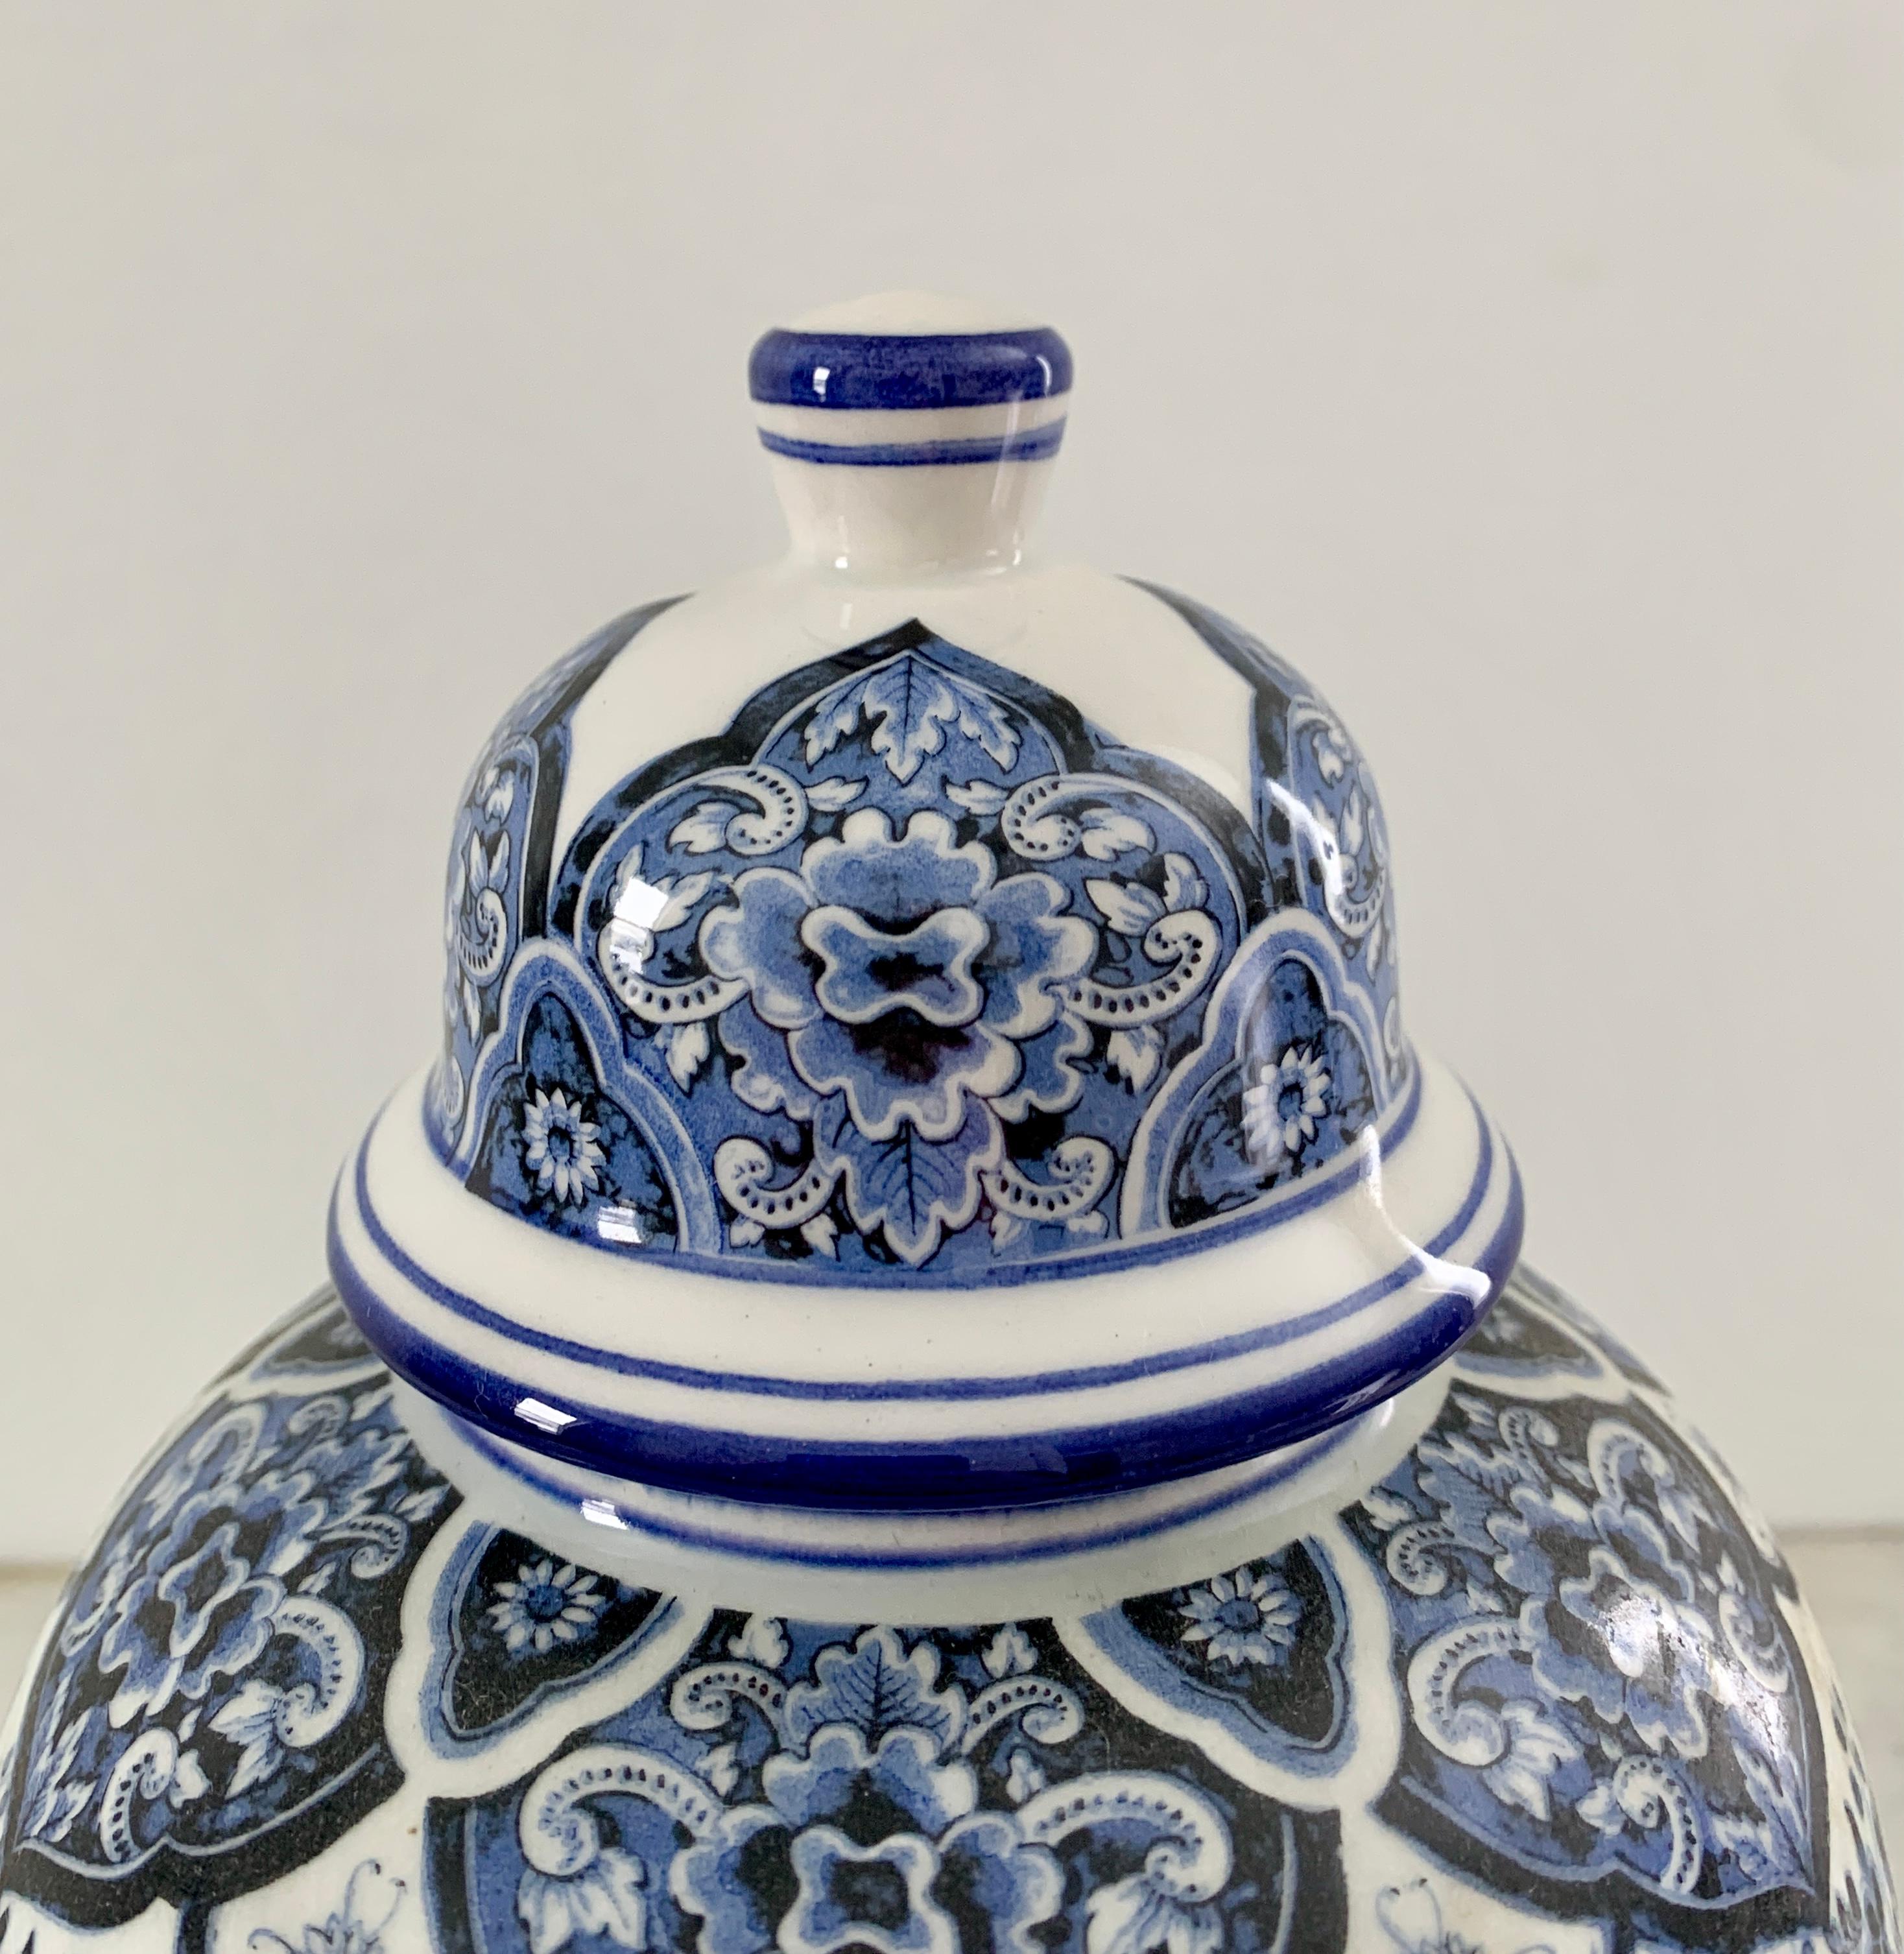 A beautiful Delft chinoiserie style blue and white porcelain covered ginger jar or temple jar.

By Ardalt Blue Delfia

Italy, Mid-20th Century

Measures: 5.25